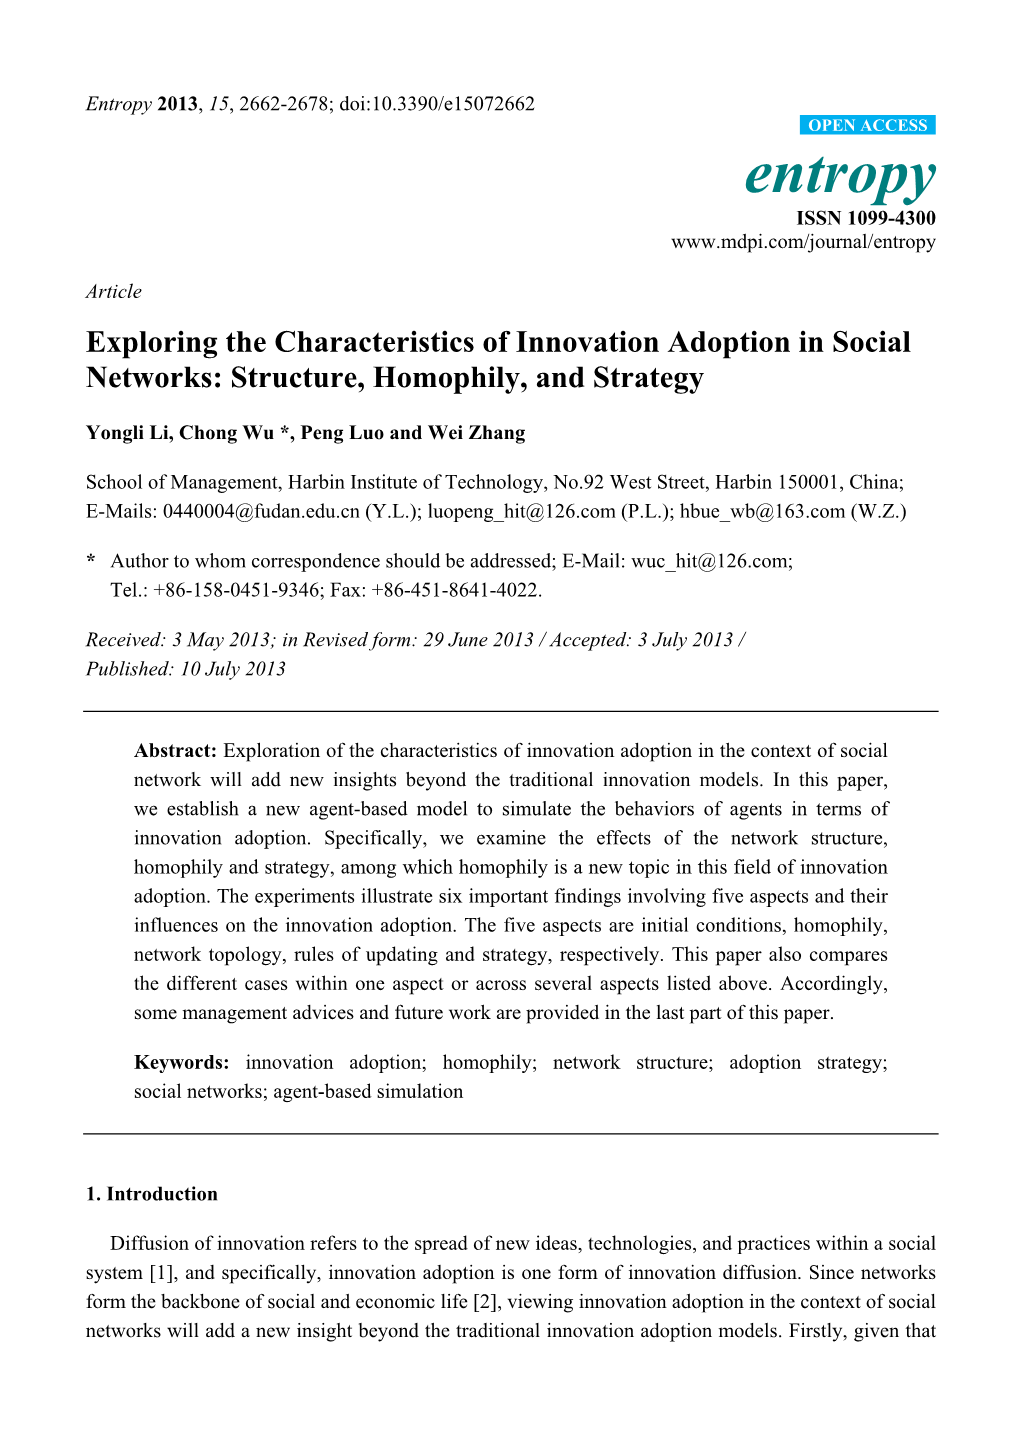 Exploring the Characteristics of Innovation Adoption in Social Networks: Structure, Homophily, and Strategy